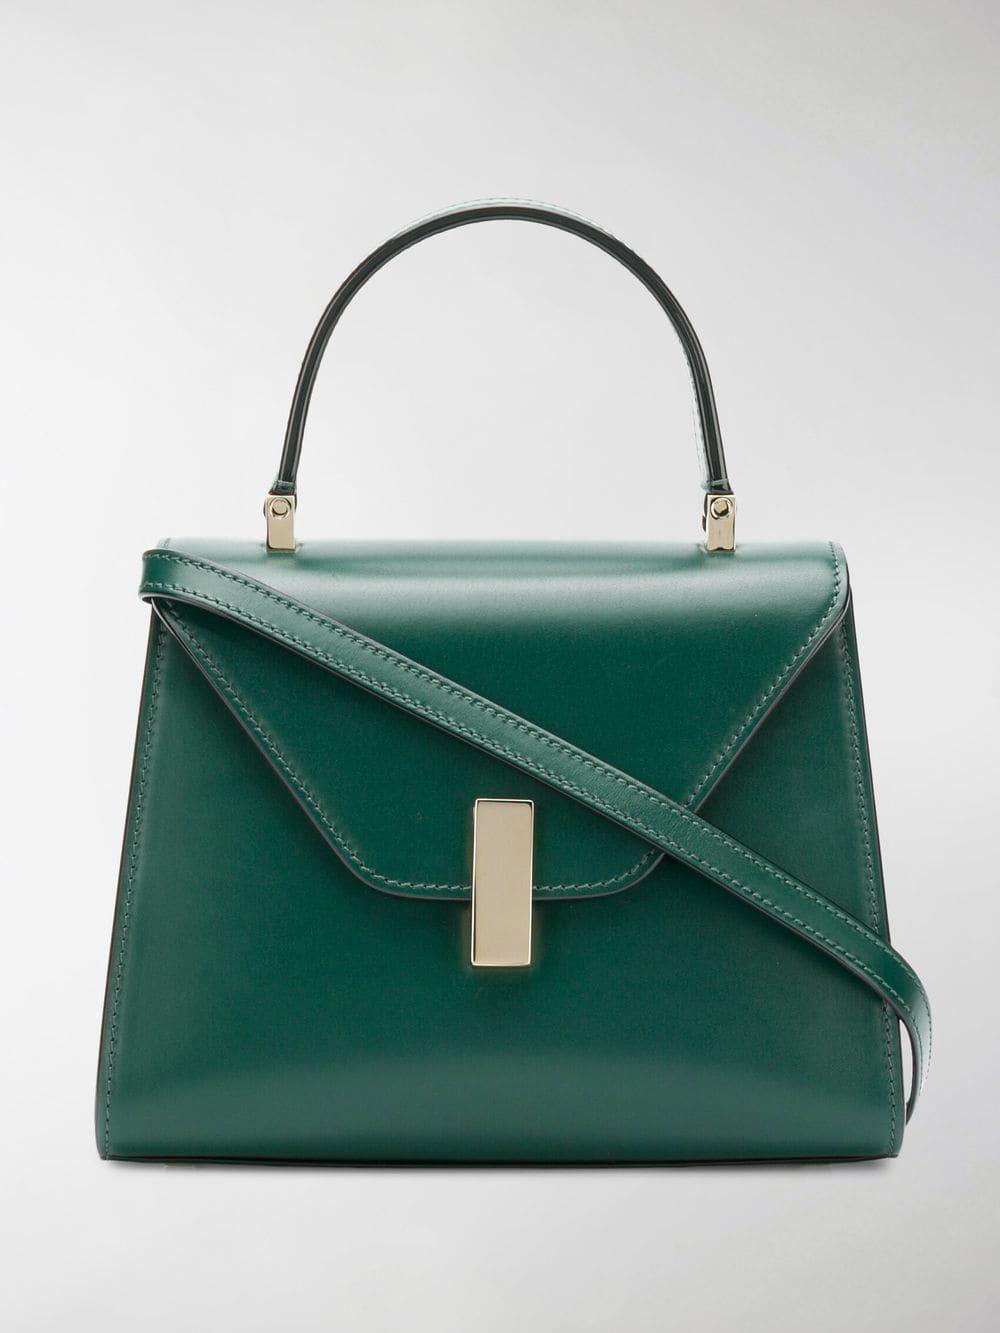 Valextra Leather Iside Mini Tote Bag in Green - Lyst